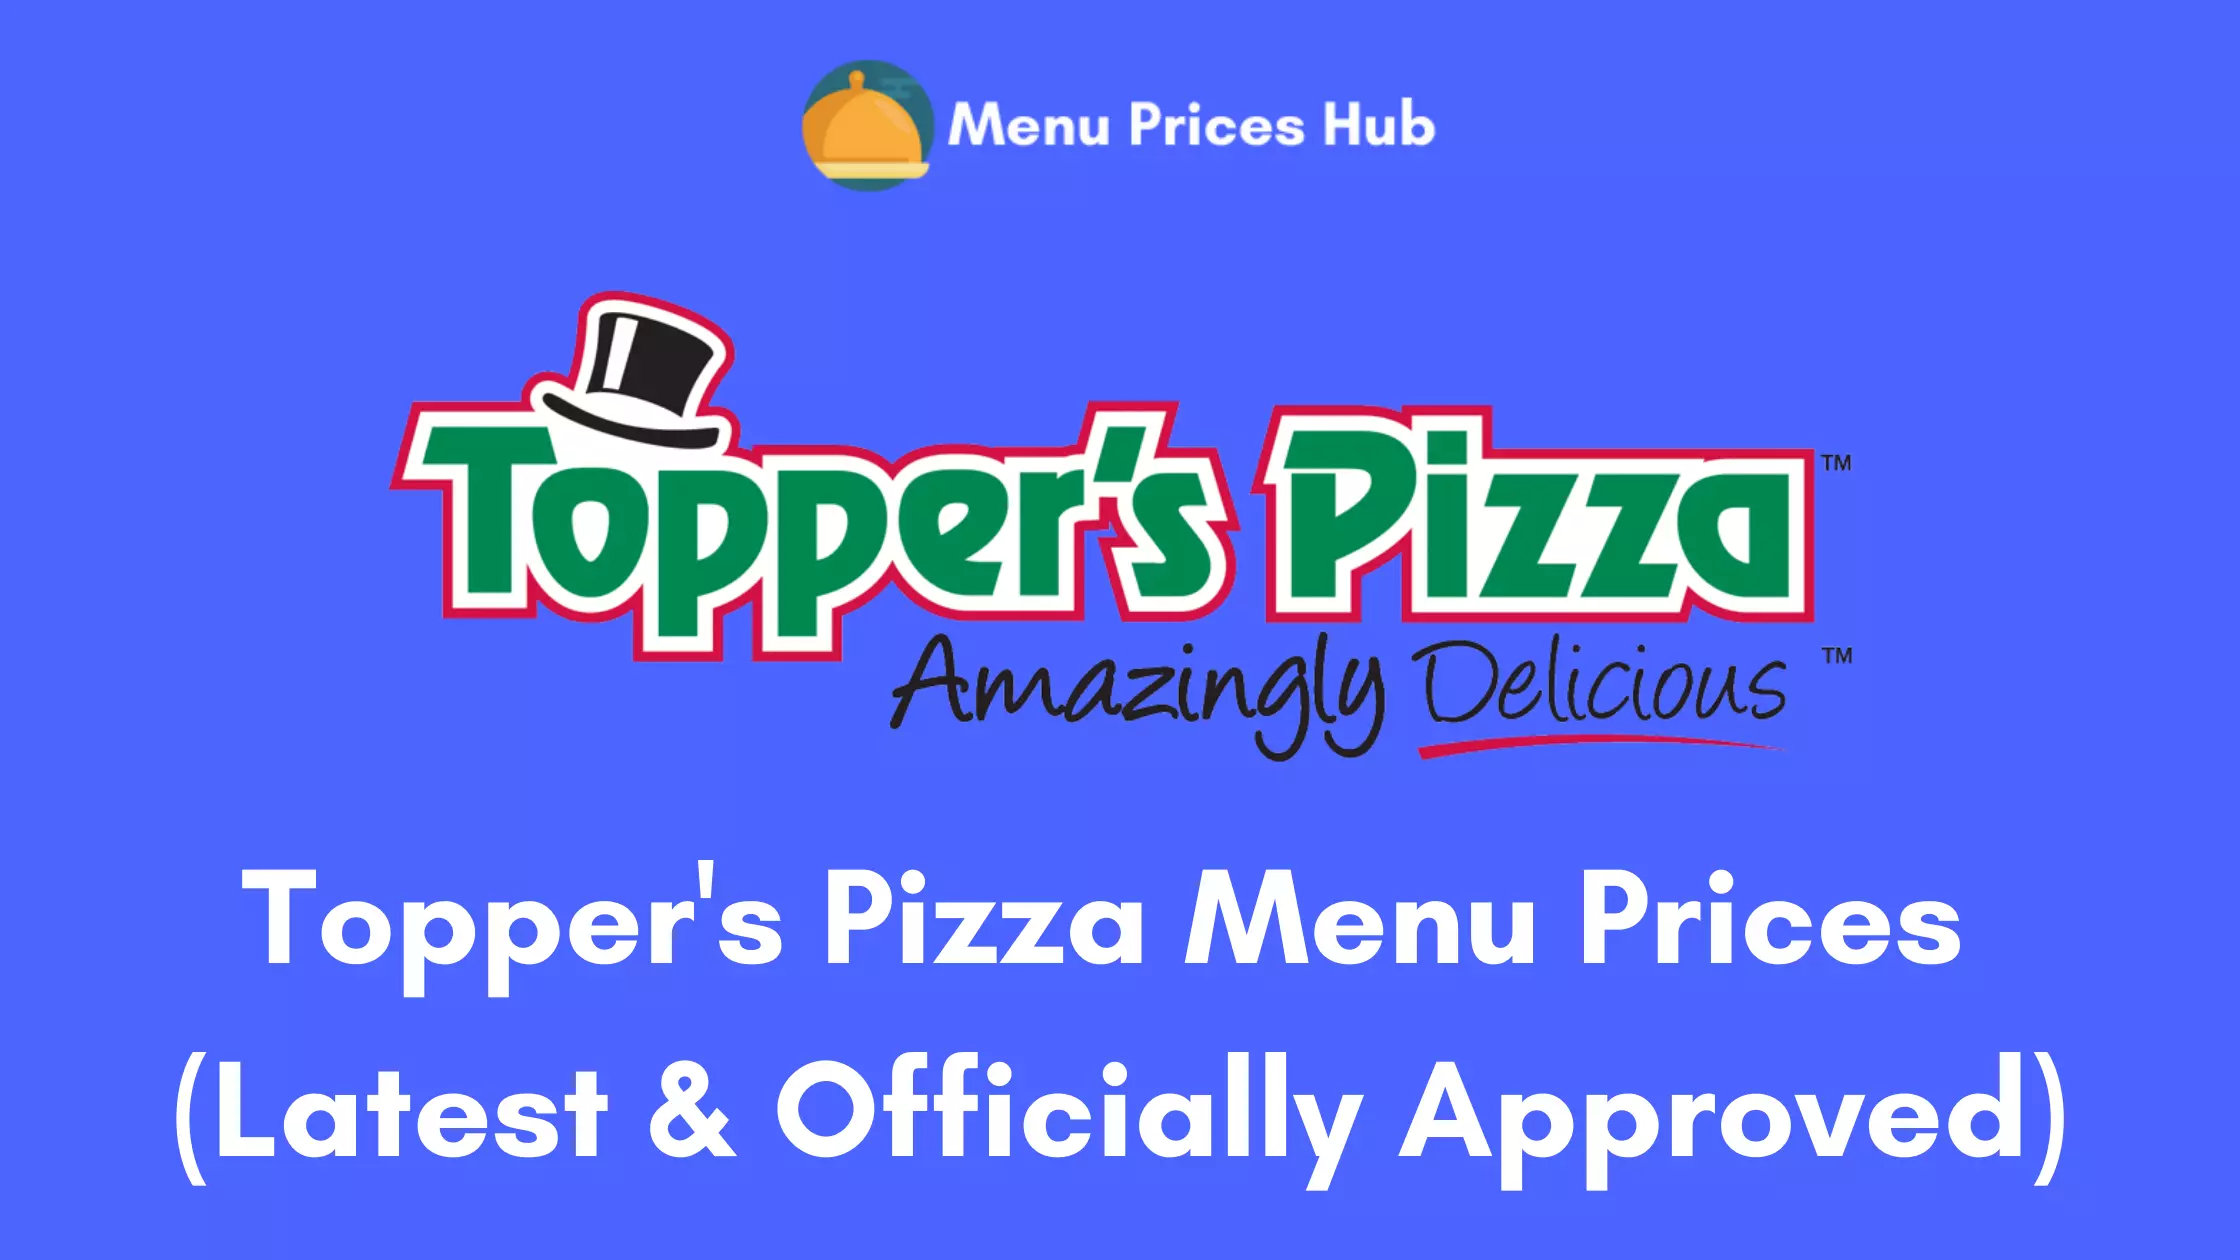 Toppers Pizza menu prices